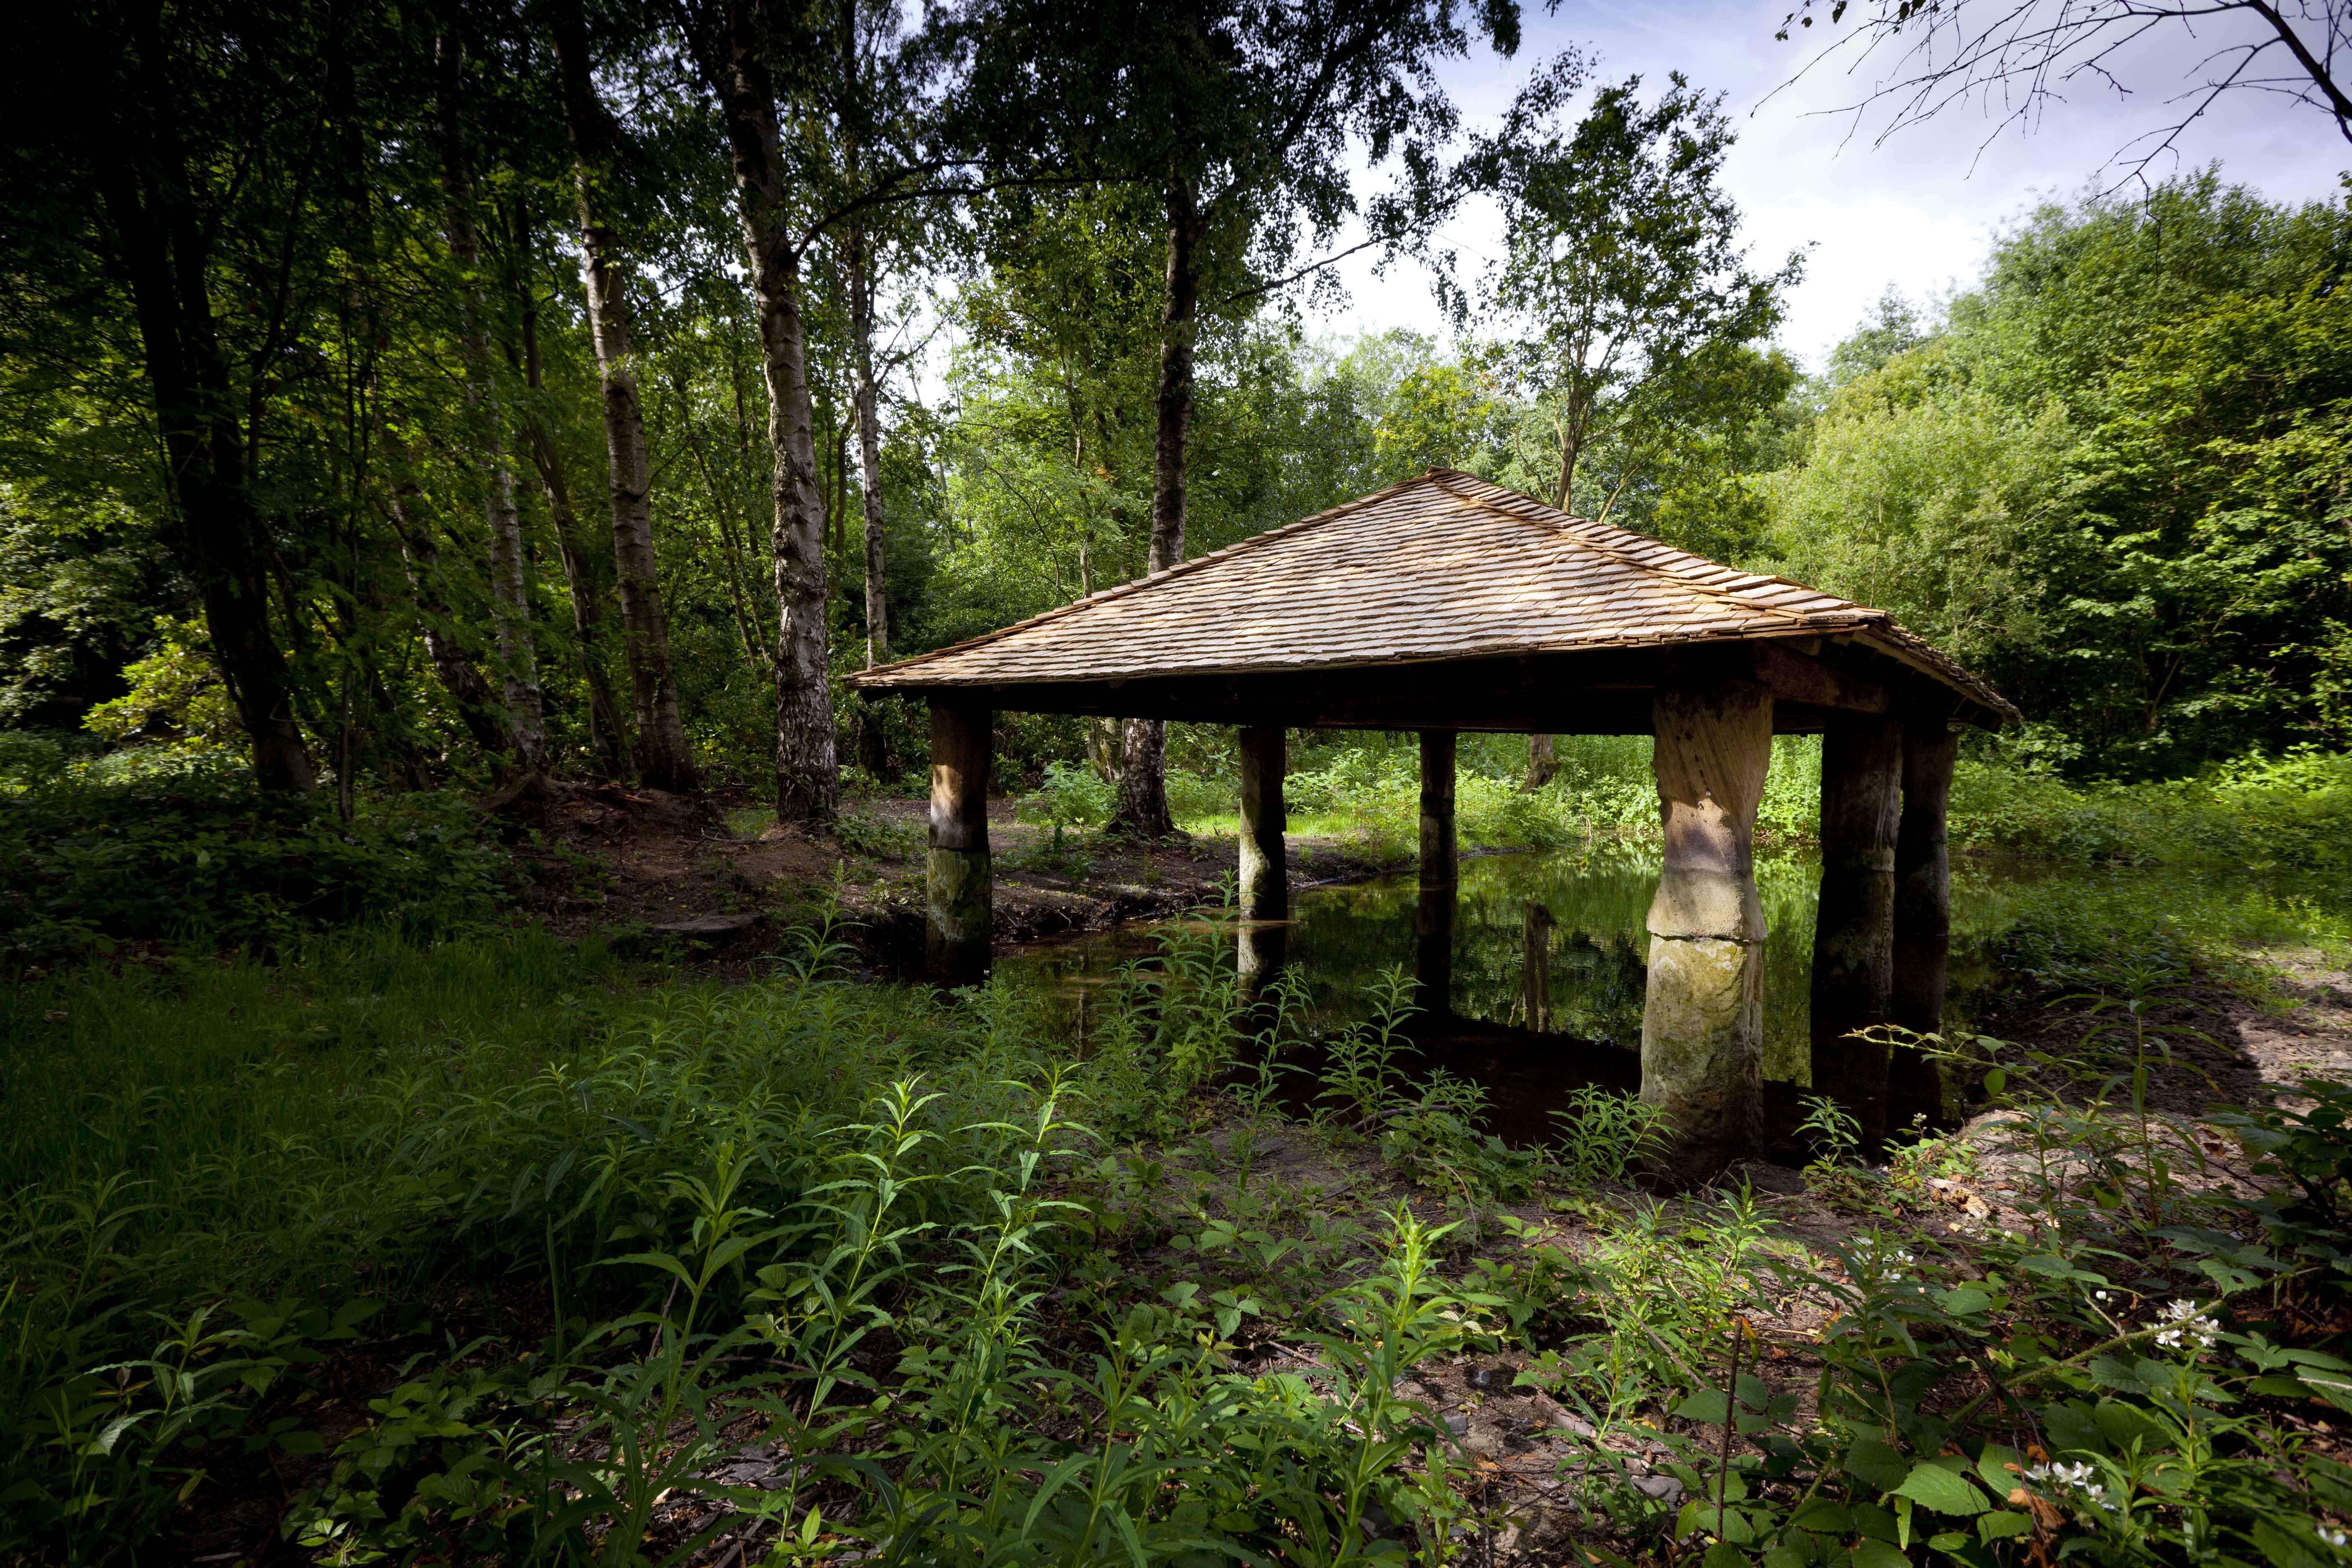 A tiled roof shelter over water in woodland.